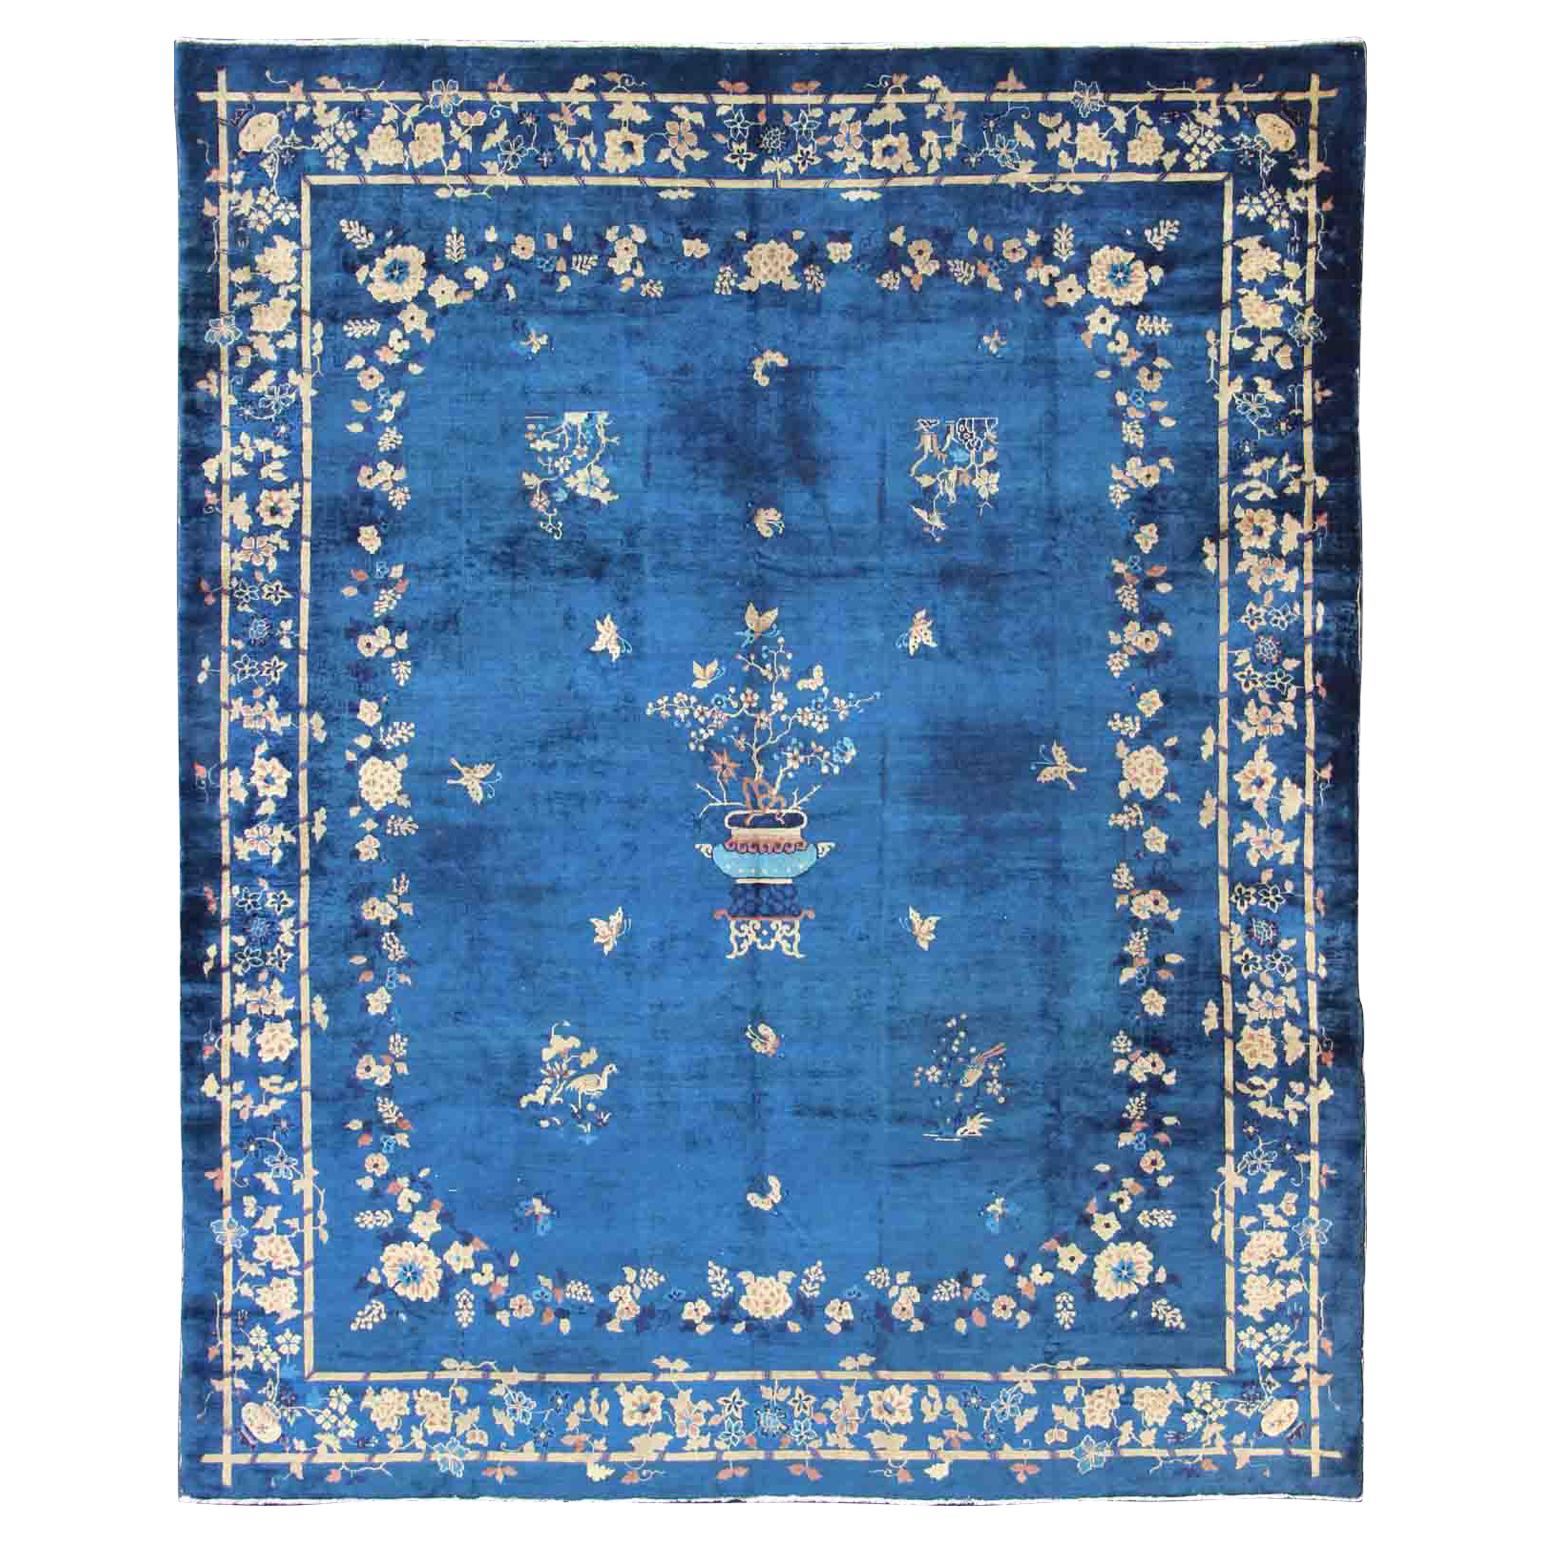 Antique Chinese Peking Rug in Navy Blue with Medallion Flower Vases and Vines 